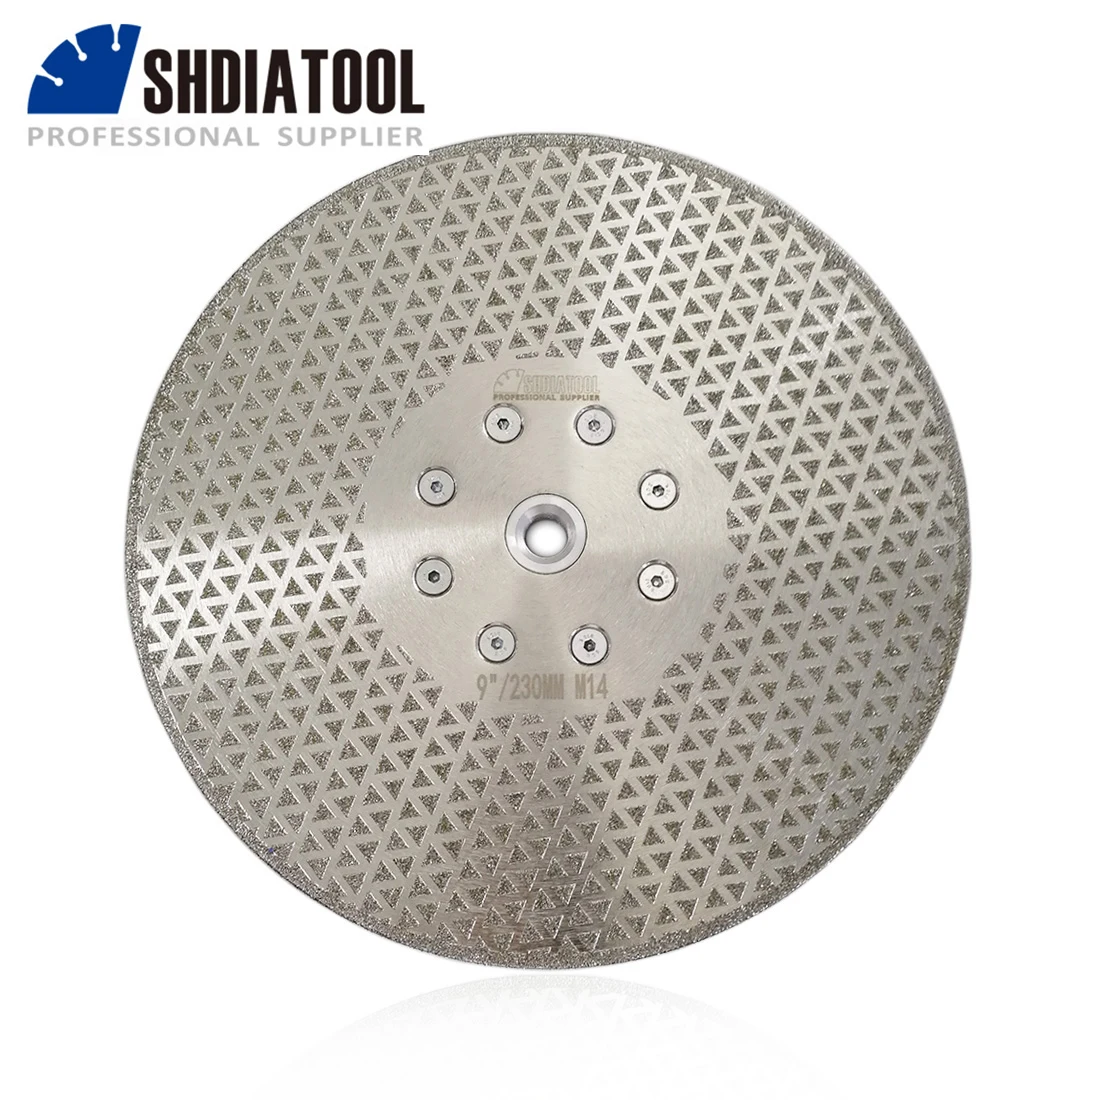 SHDIATOOL 1pc 9"/230mm Electroplated Diamond Cutting Grinding Discs for Marble 